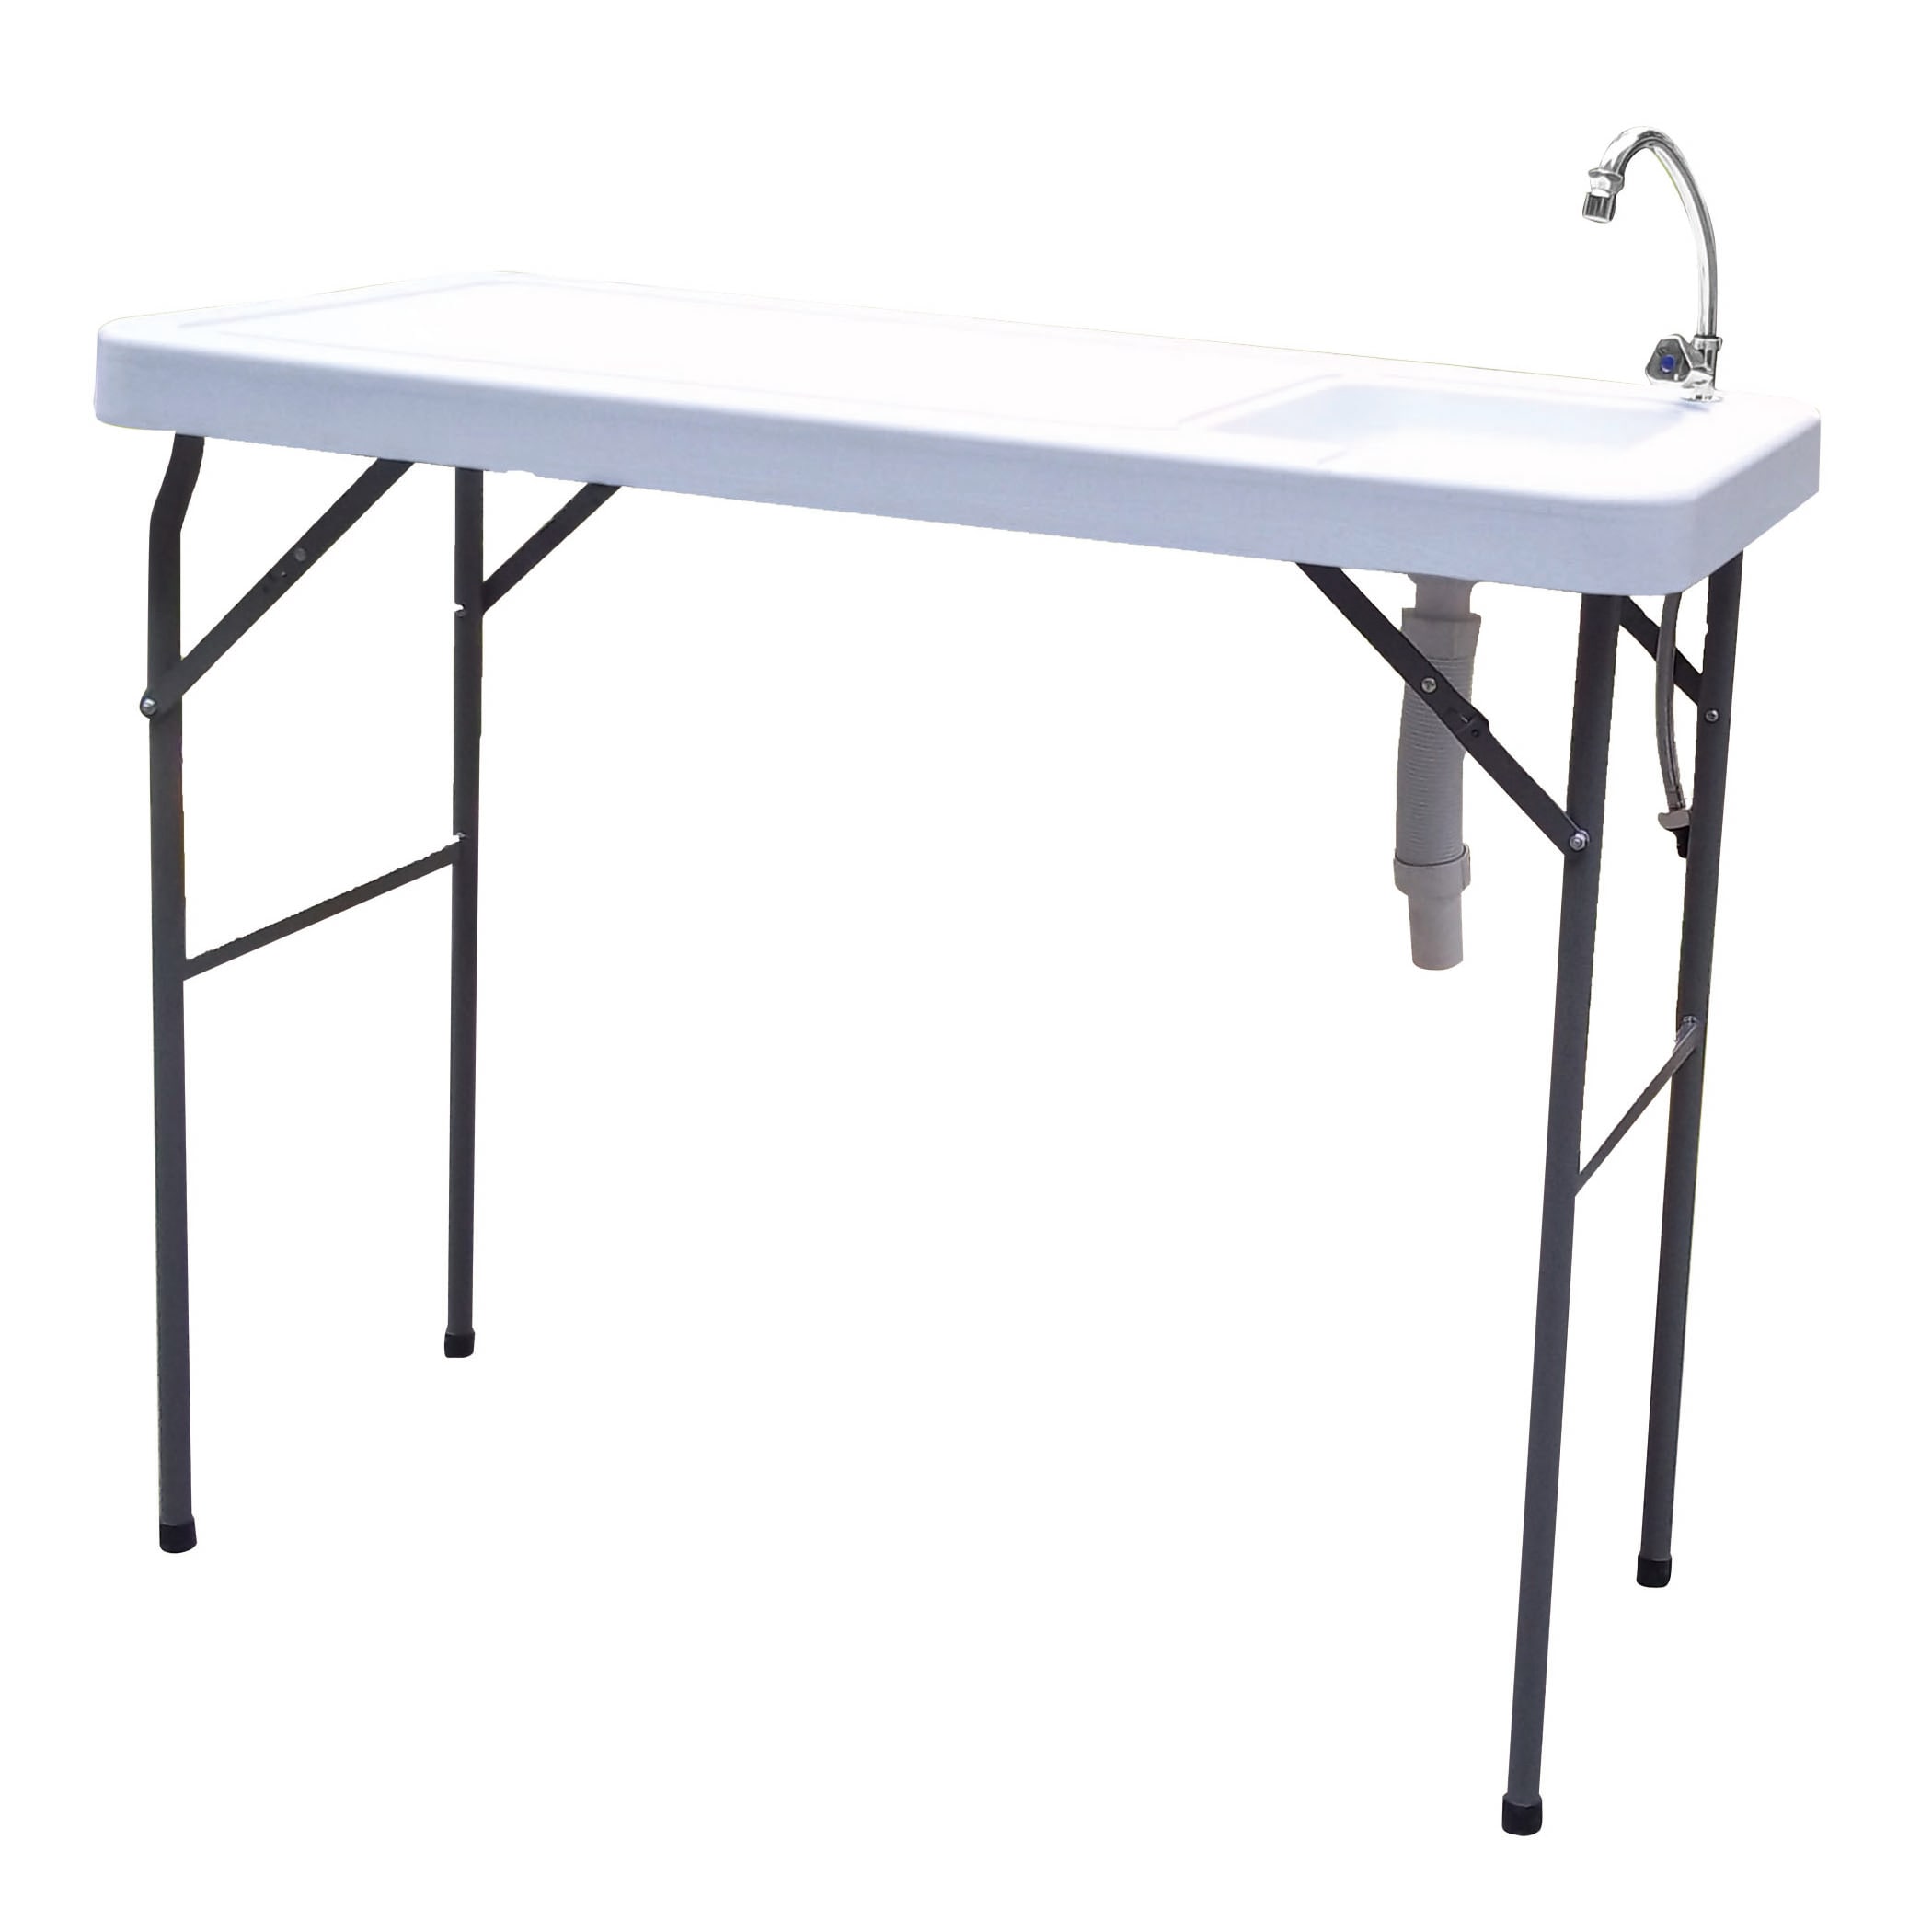 Bayfeve Outdoor Fish and Game Cutting Cleaning Table with Sink and Faucet | BF-9323A1